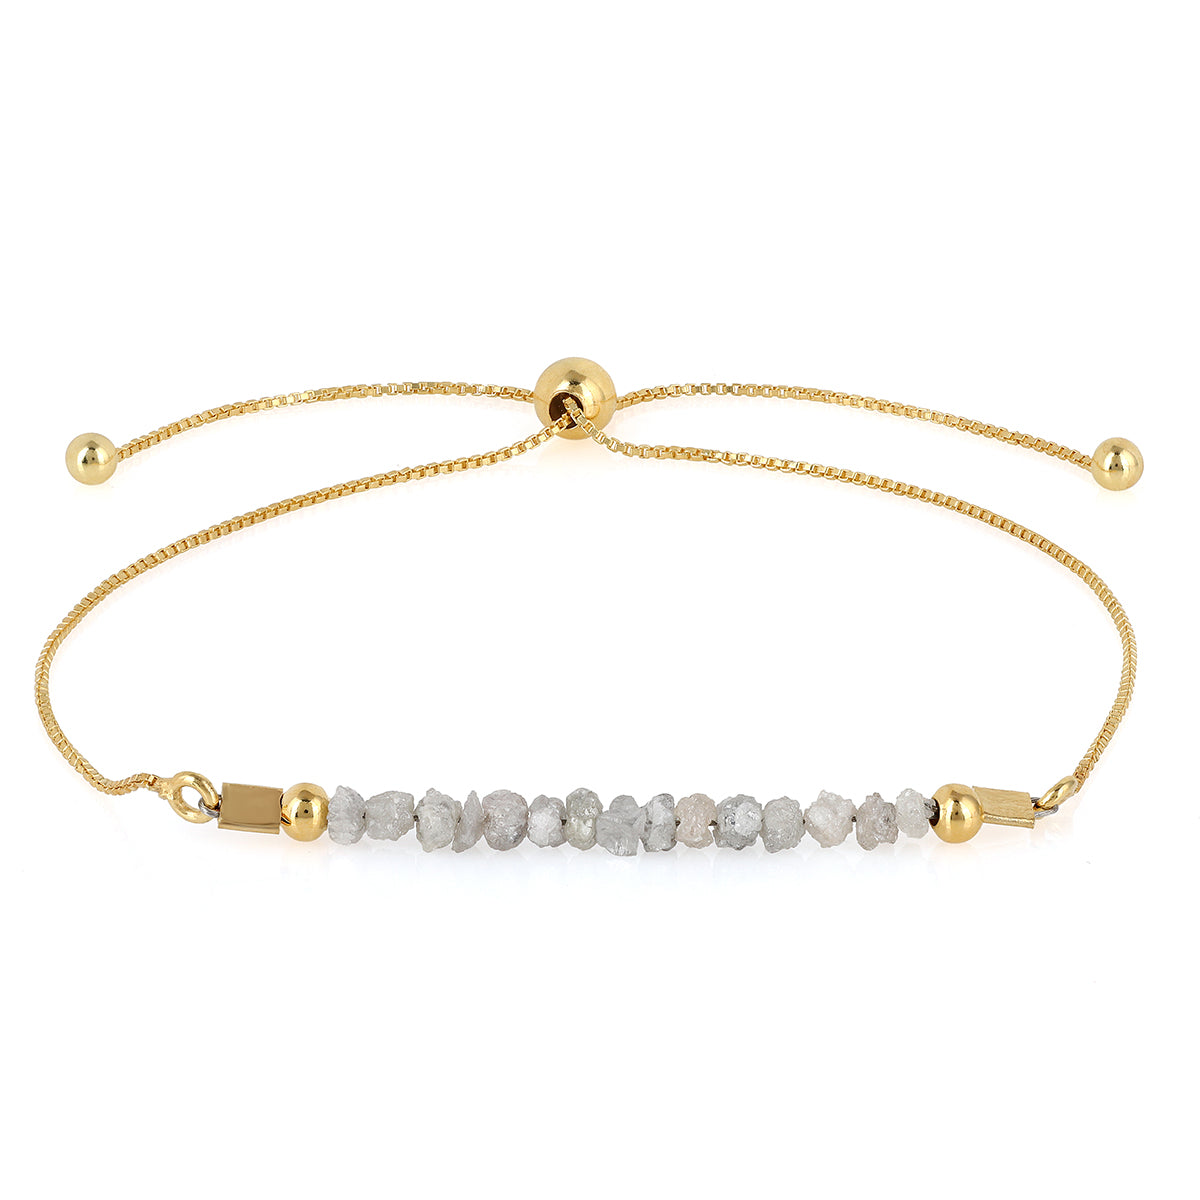 Chain Link Hope Bolo Bracelet in Worn Gold. - Focal 1.75